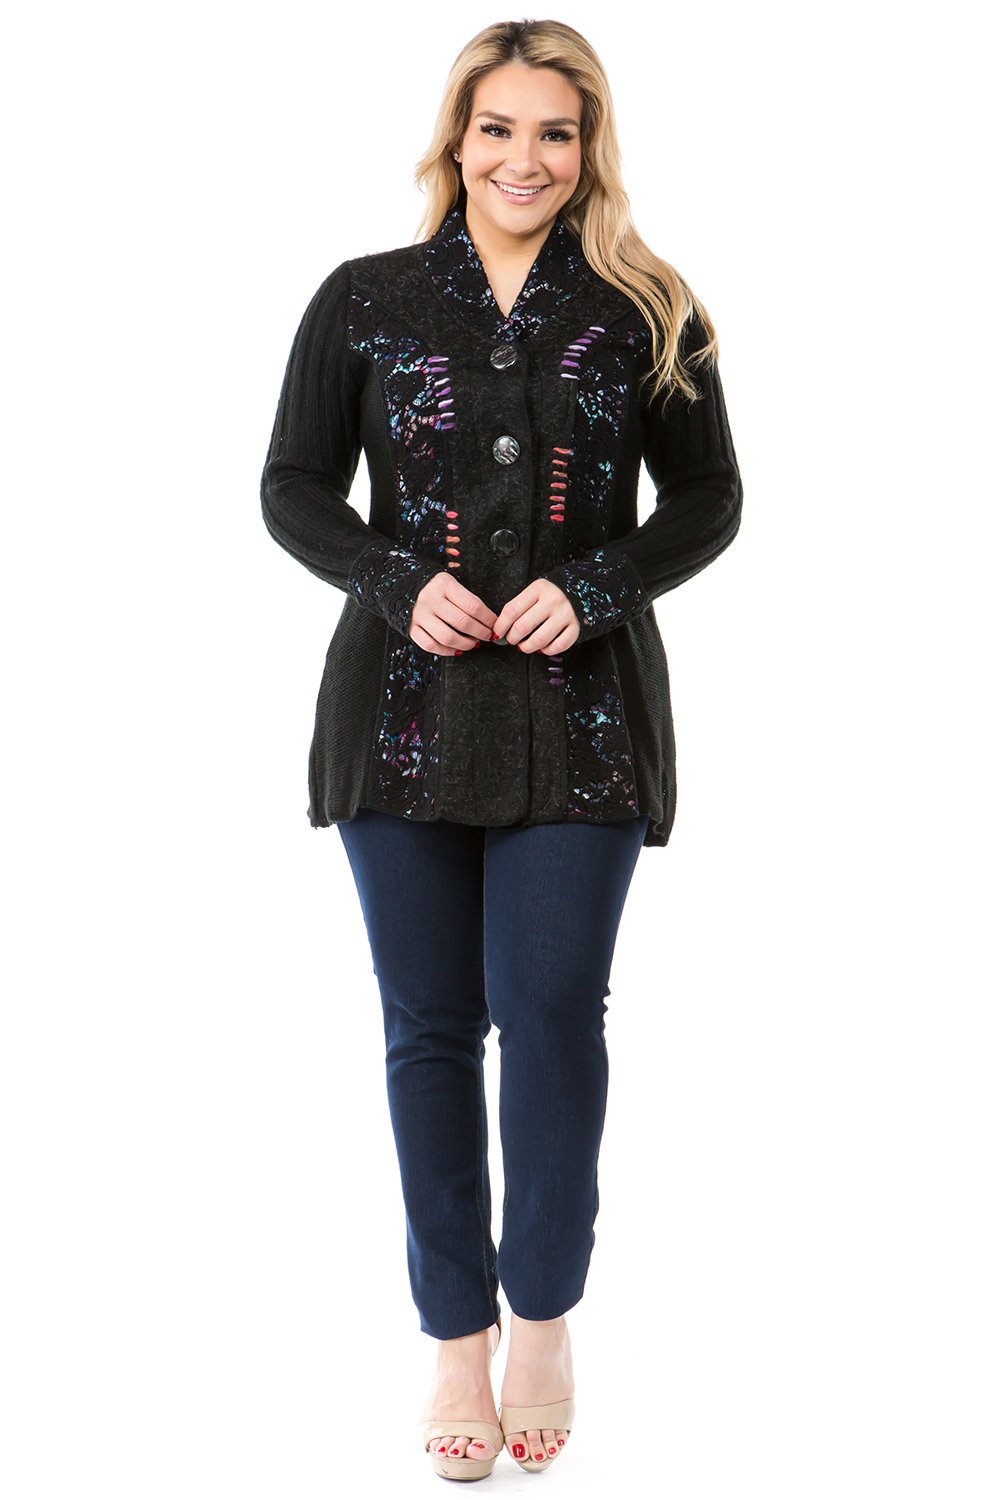 Women's Black Patchwork Lace Button Down Cardigan Coat Sweater - image 3 of 5